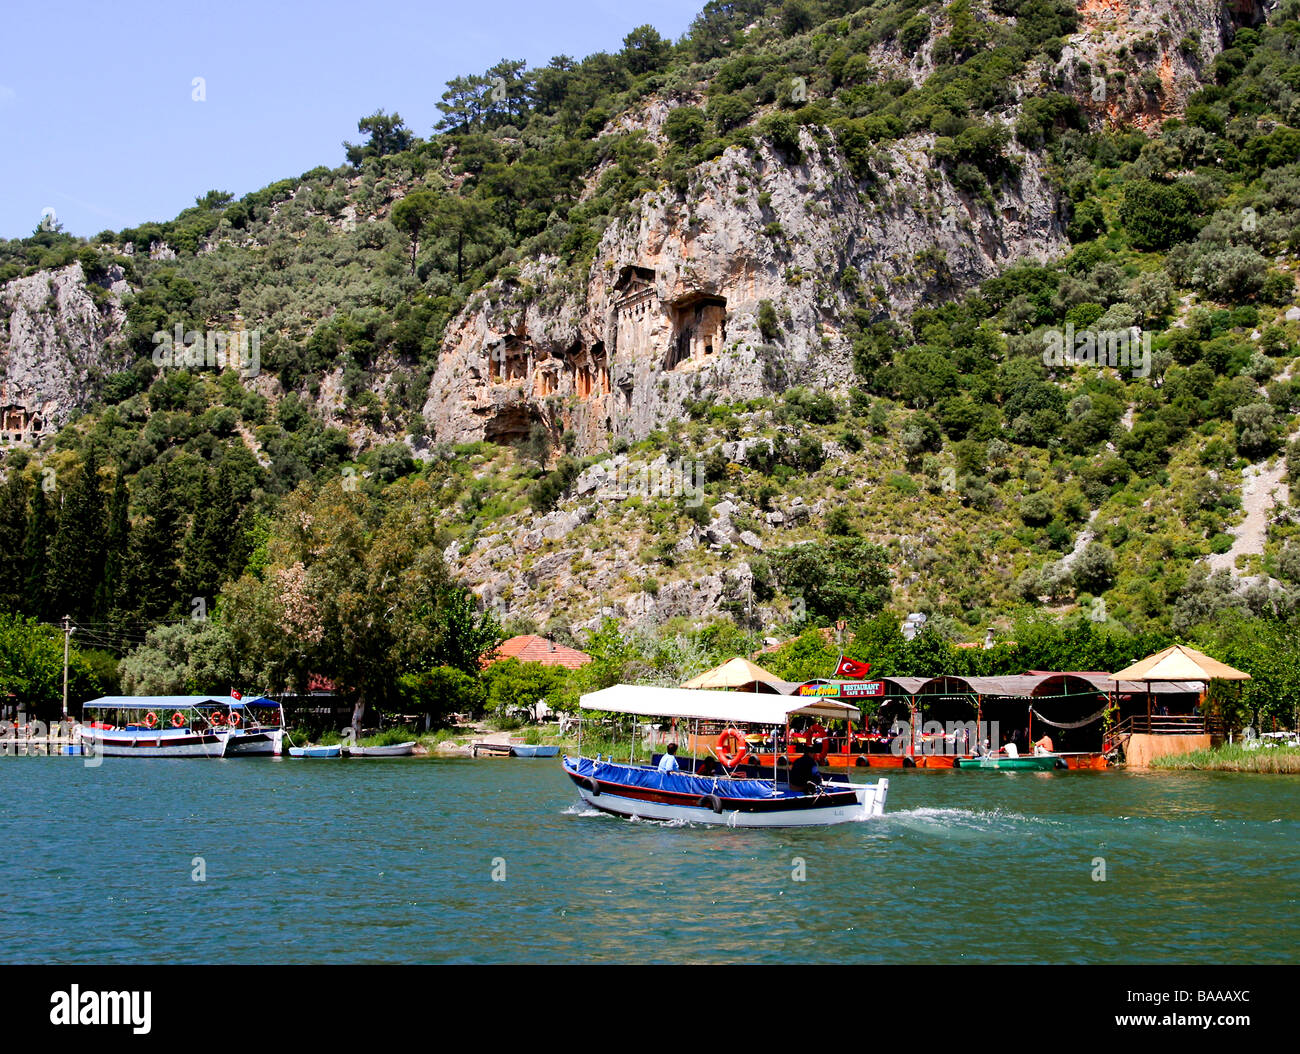 Tour boats on the river by the Ancient Rock Tombs at Kaunas, Dalyan, Turkey Stock Photo